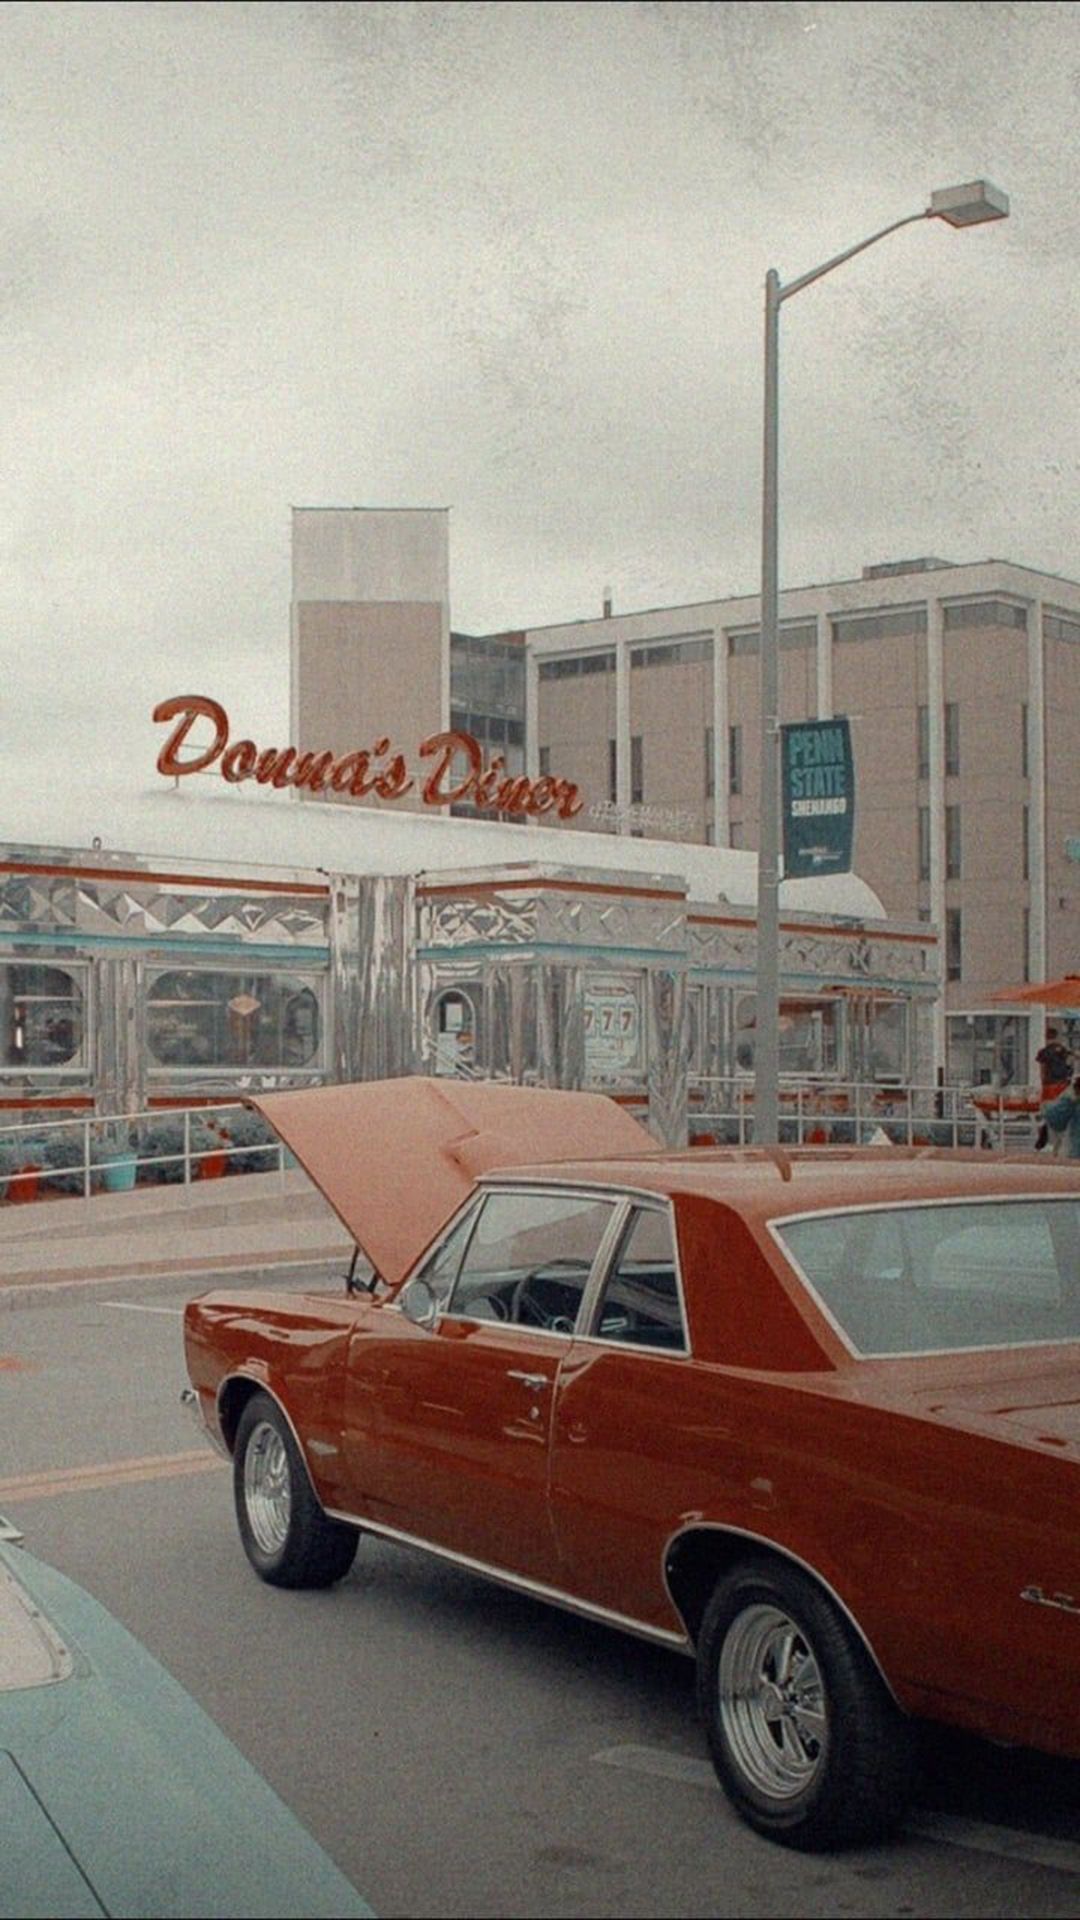 IPhone wallpaper with a vintage red car in front of a diner - Vintage, vintage fall, 50s, retro, 60s